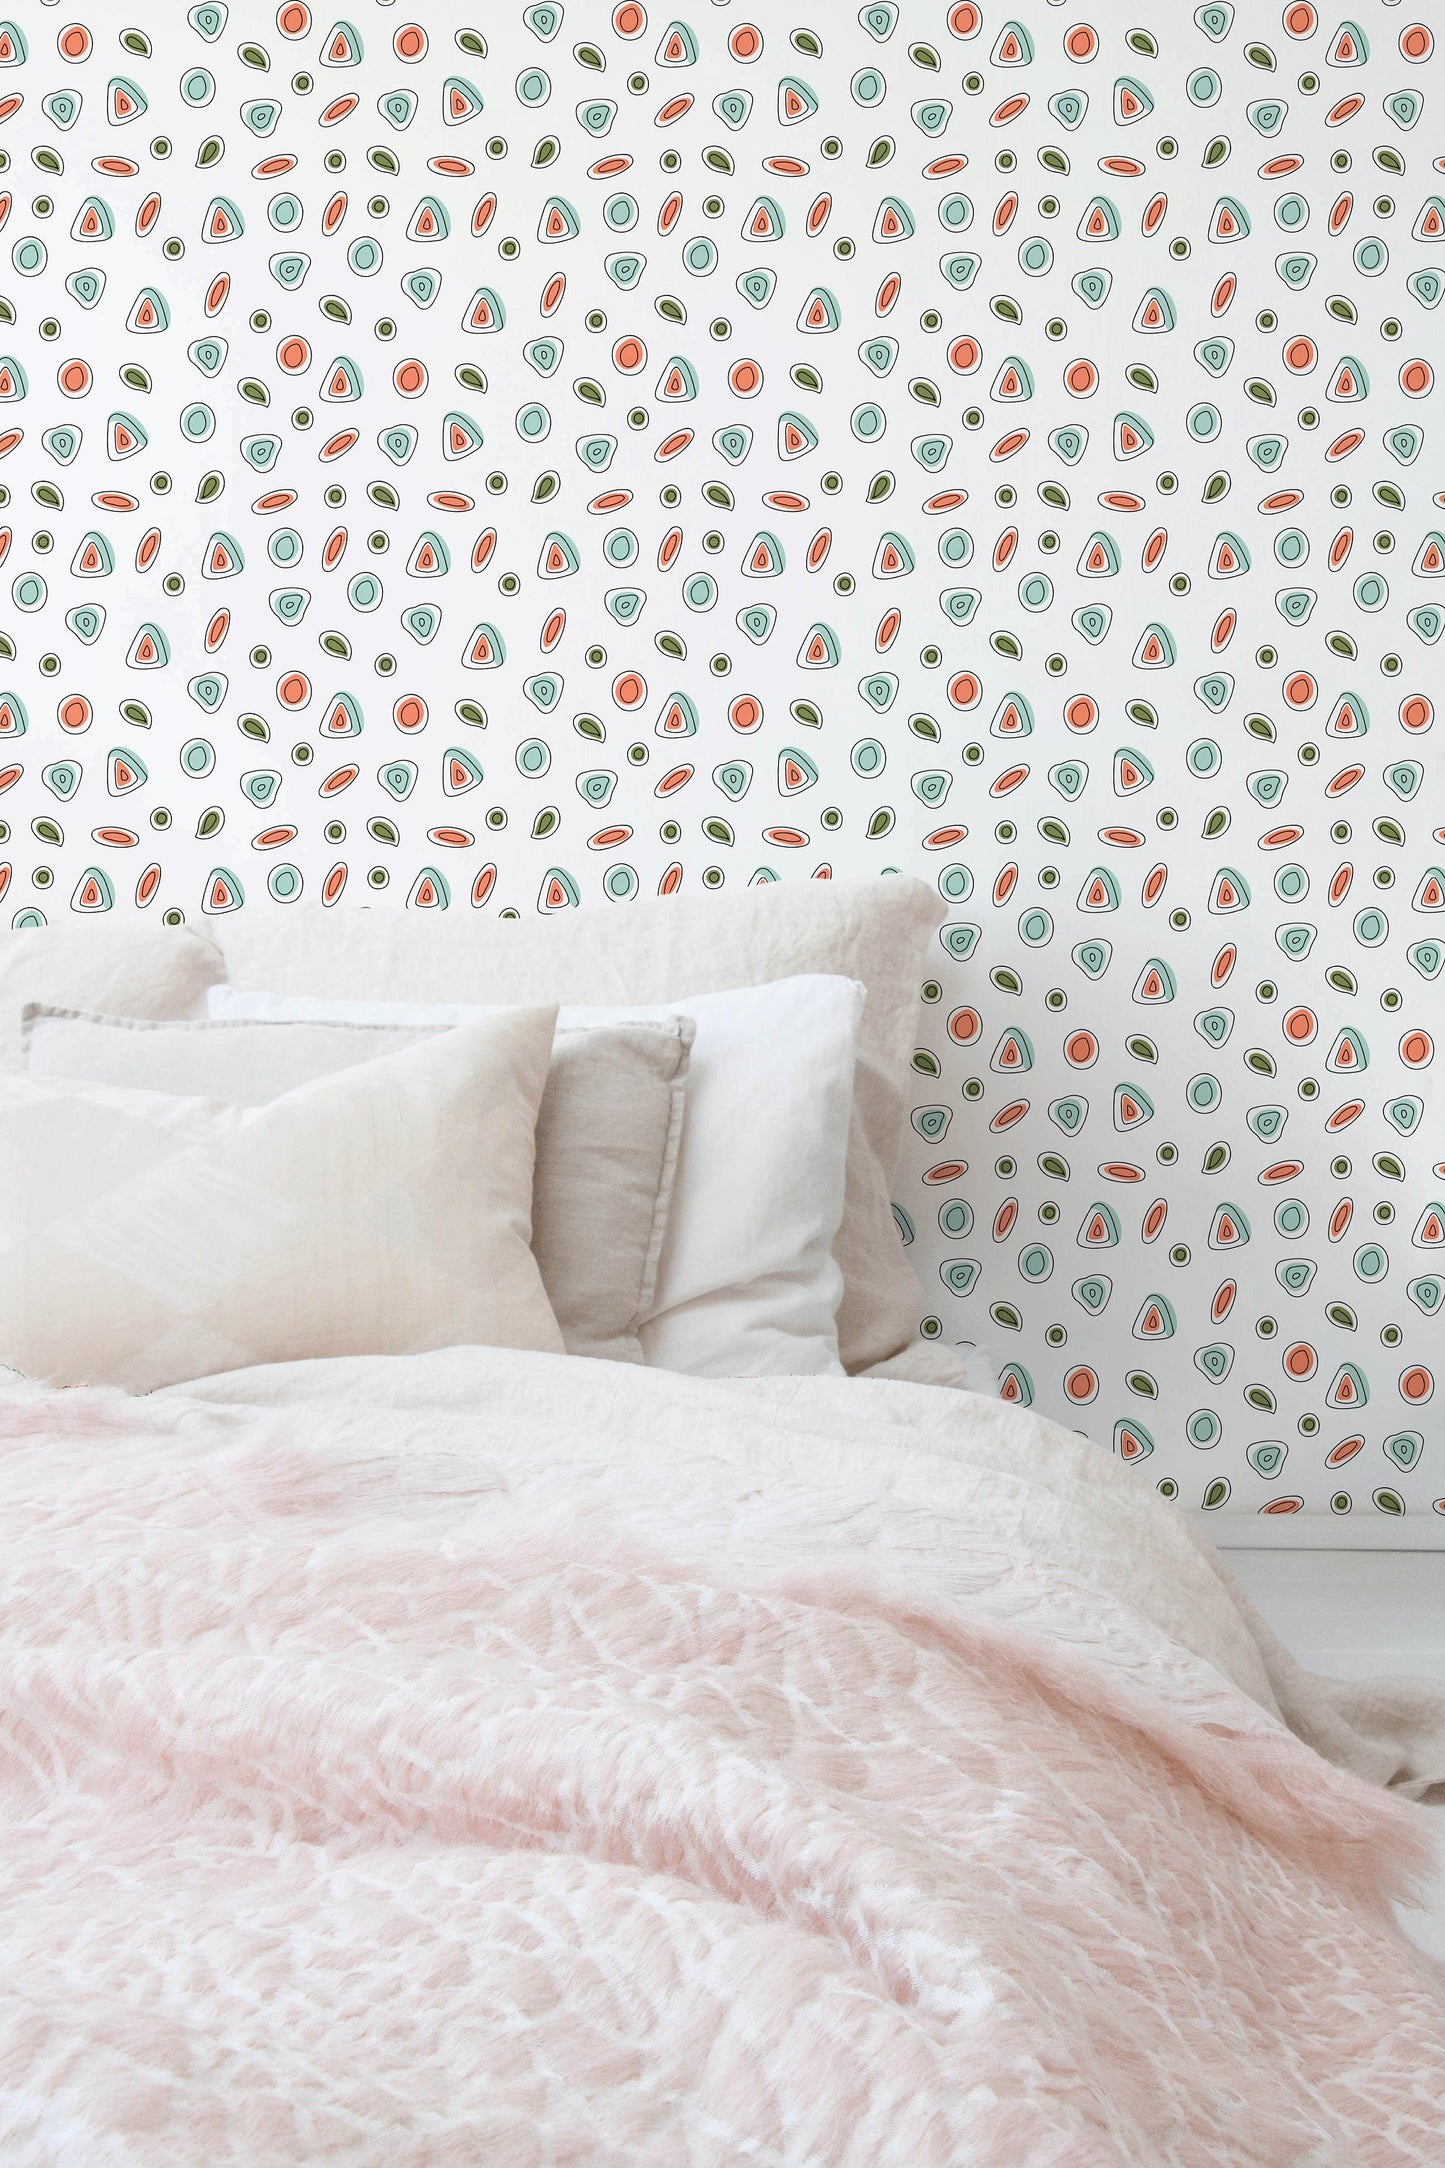 Playful Abstract Pebbles Wallpaper - C031